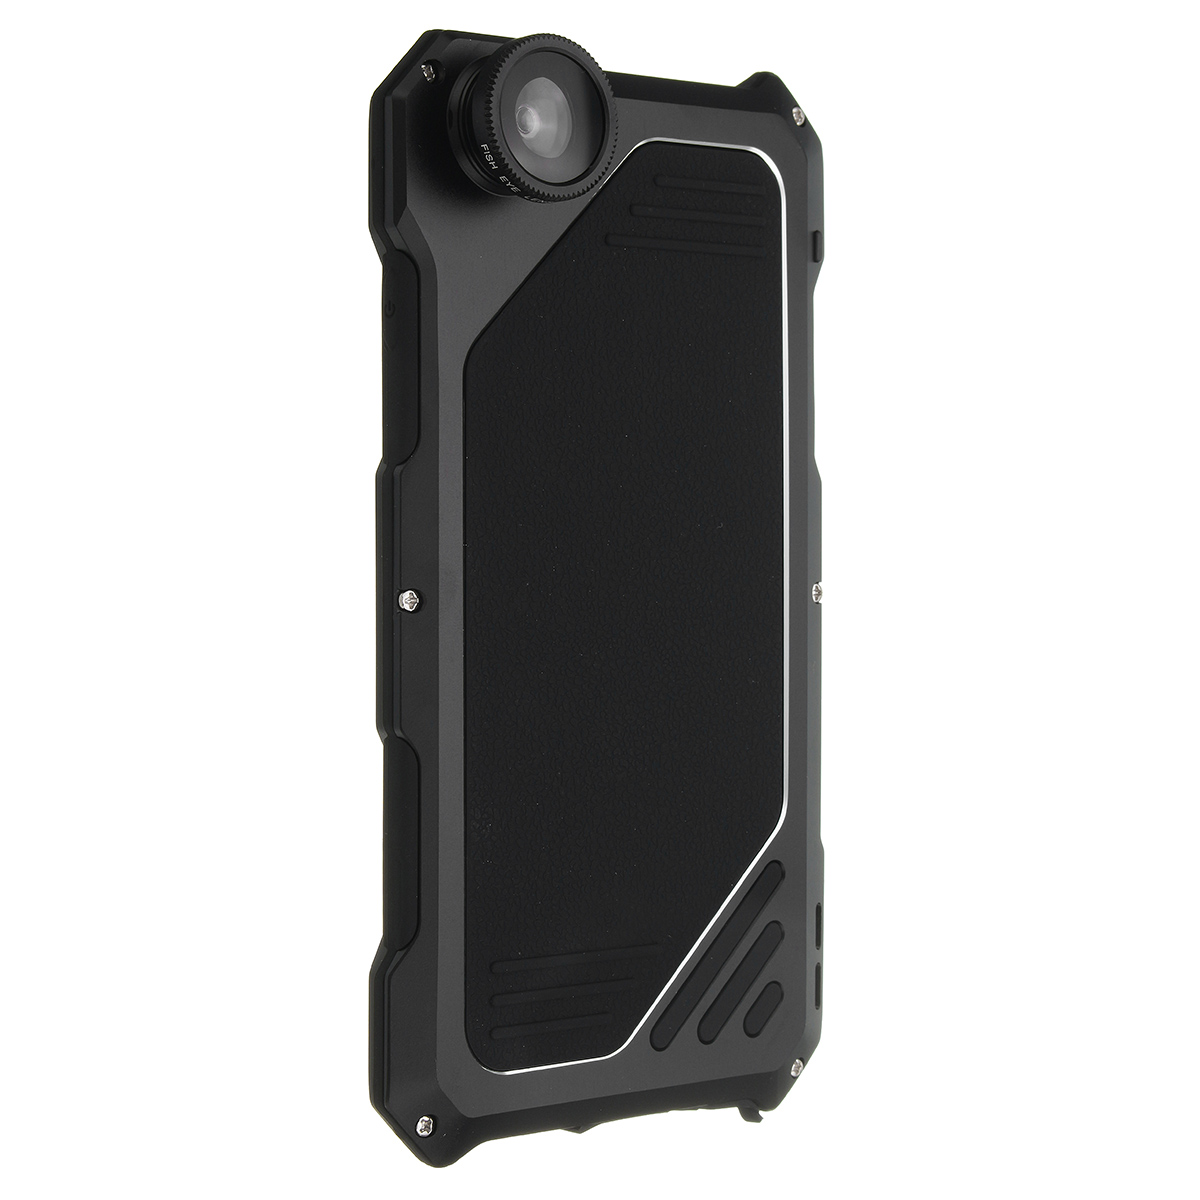 Find 4 In 1 Waterproof Case Wide Angle Macro Fisheye Camera Lens For iPhone 6 / 6s Plus 5 5 Inches for Sale on Gipsybee.com with cryptocurrencies